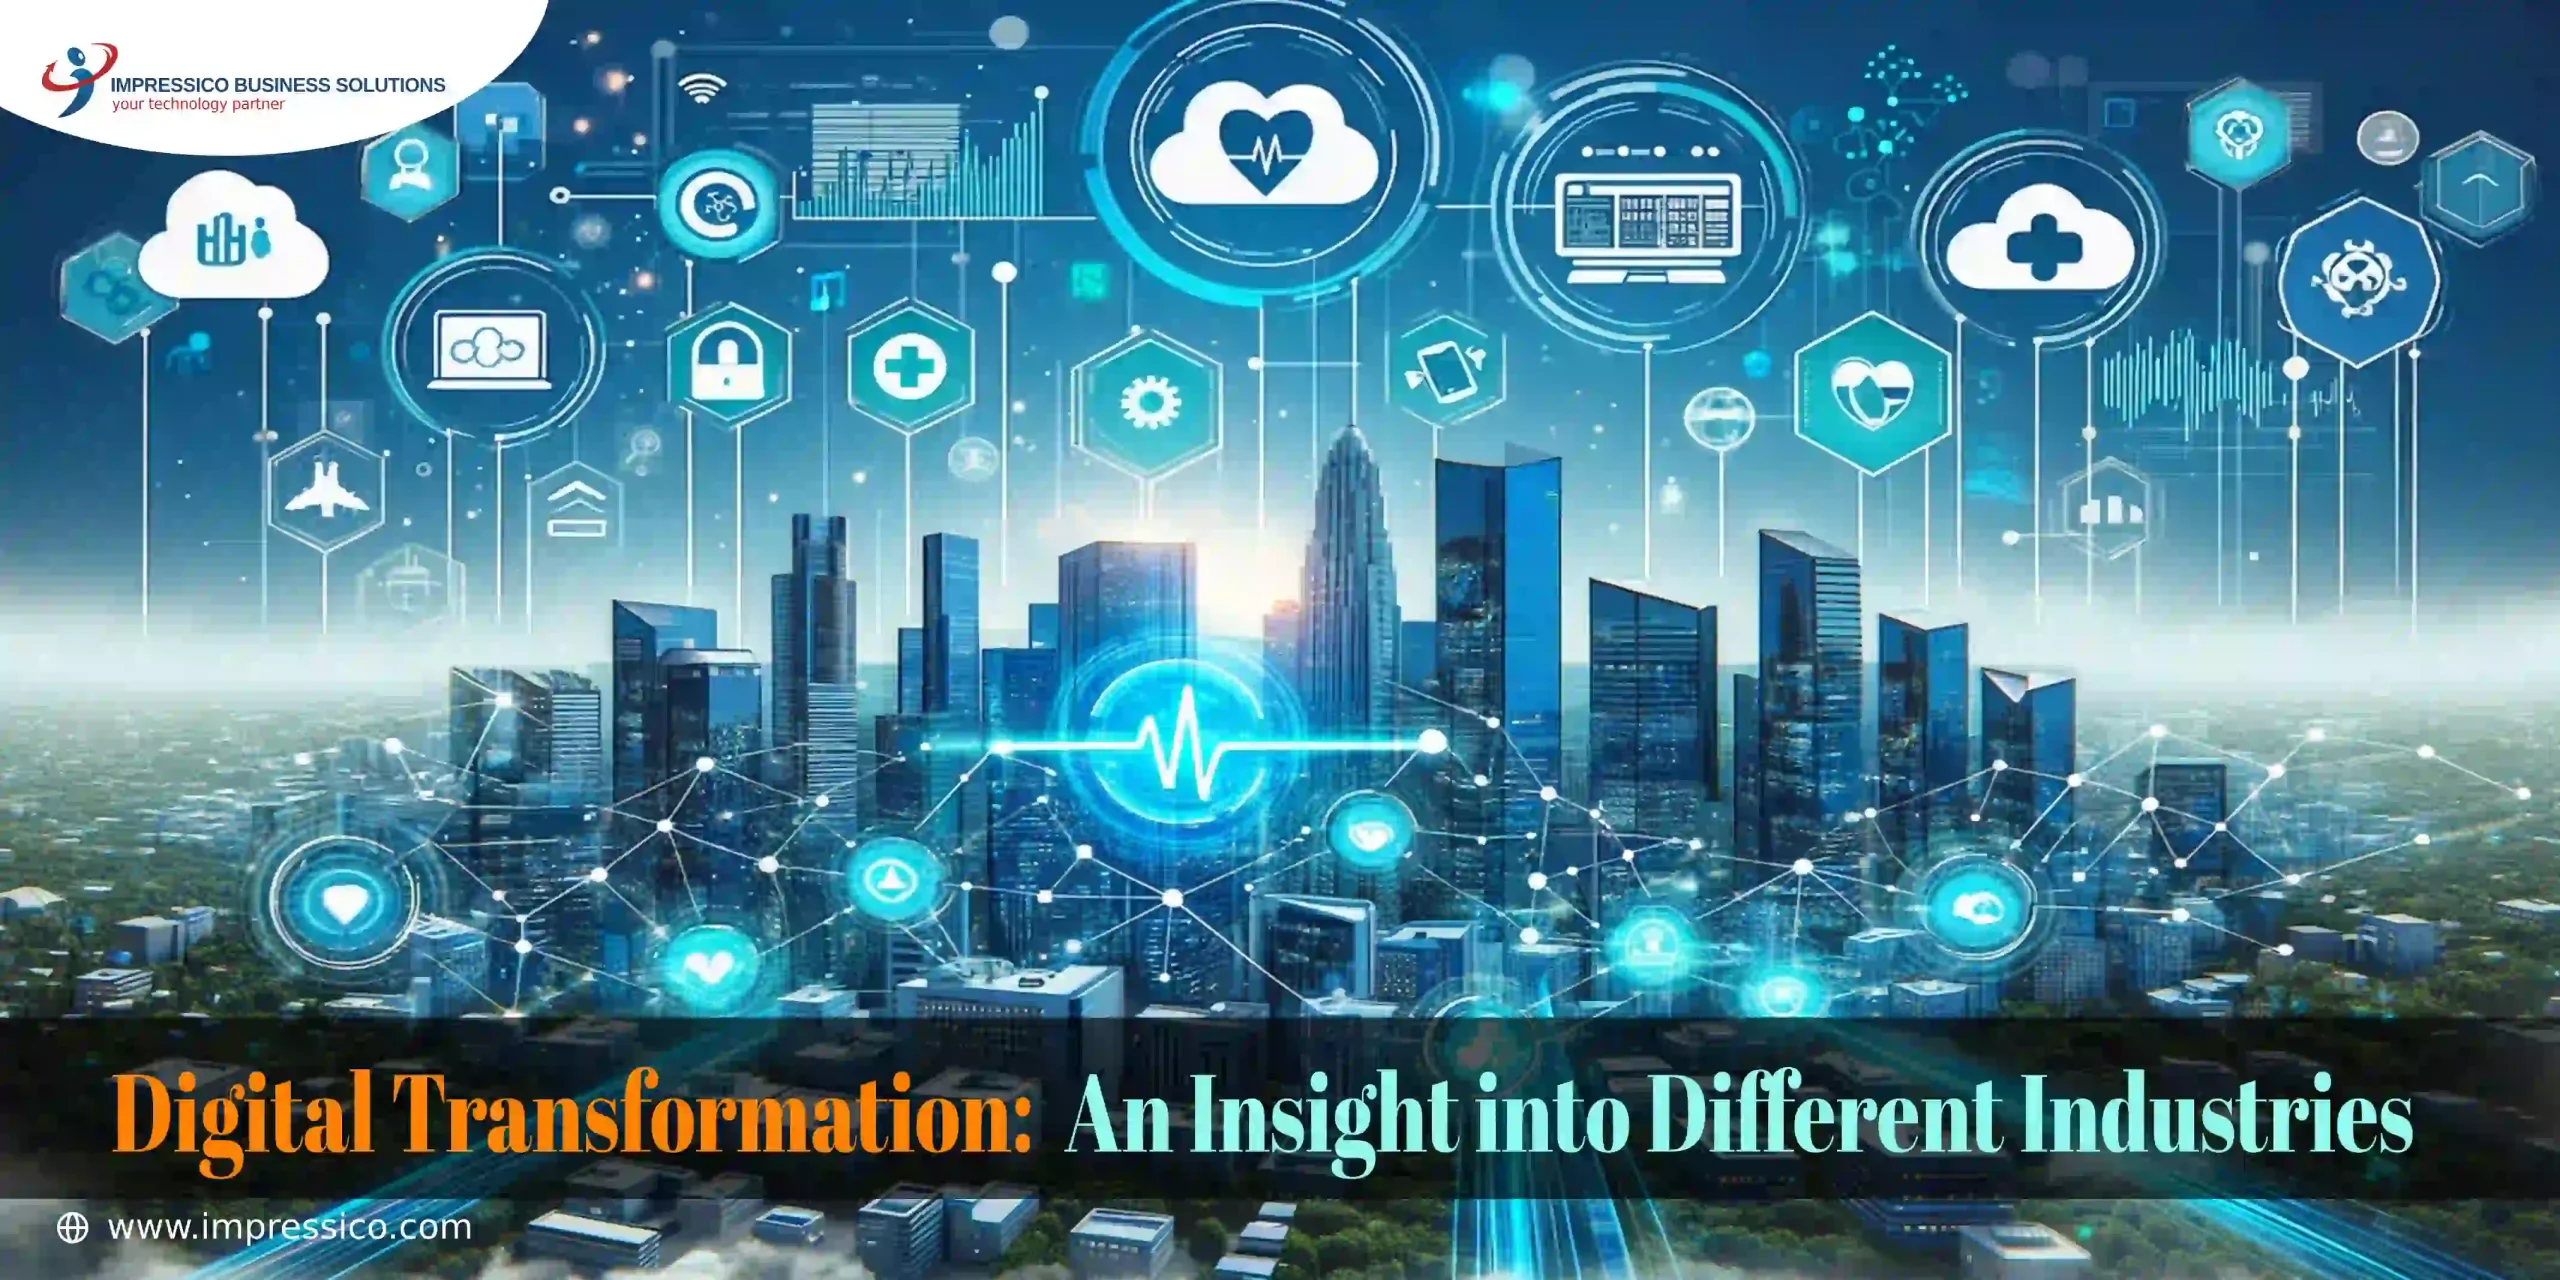 Digital Transformation: An Insight into Different Industries